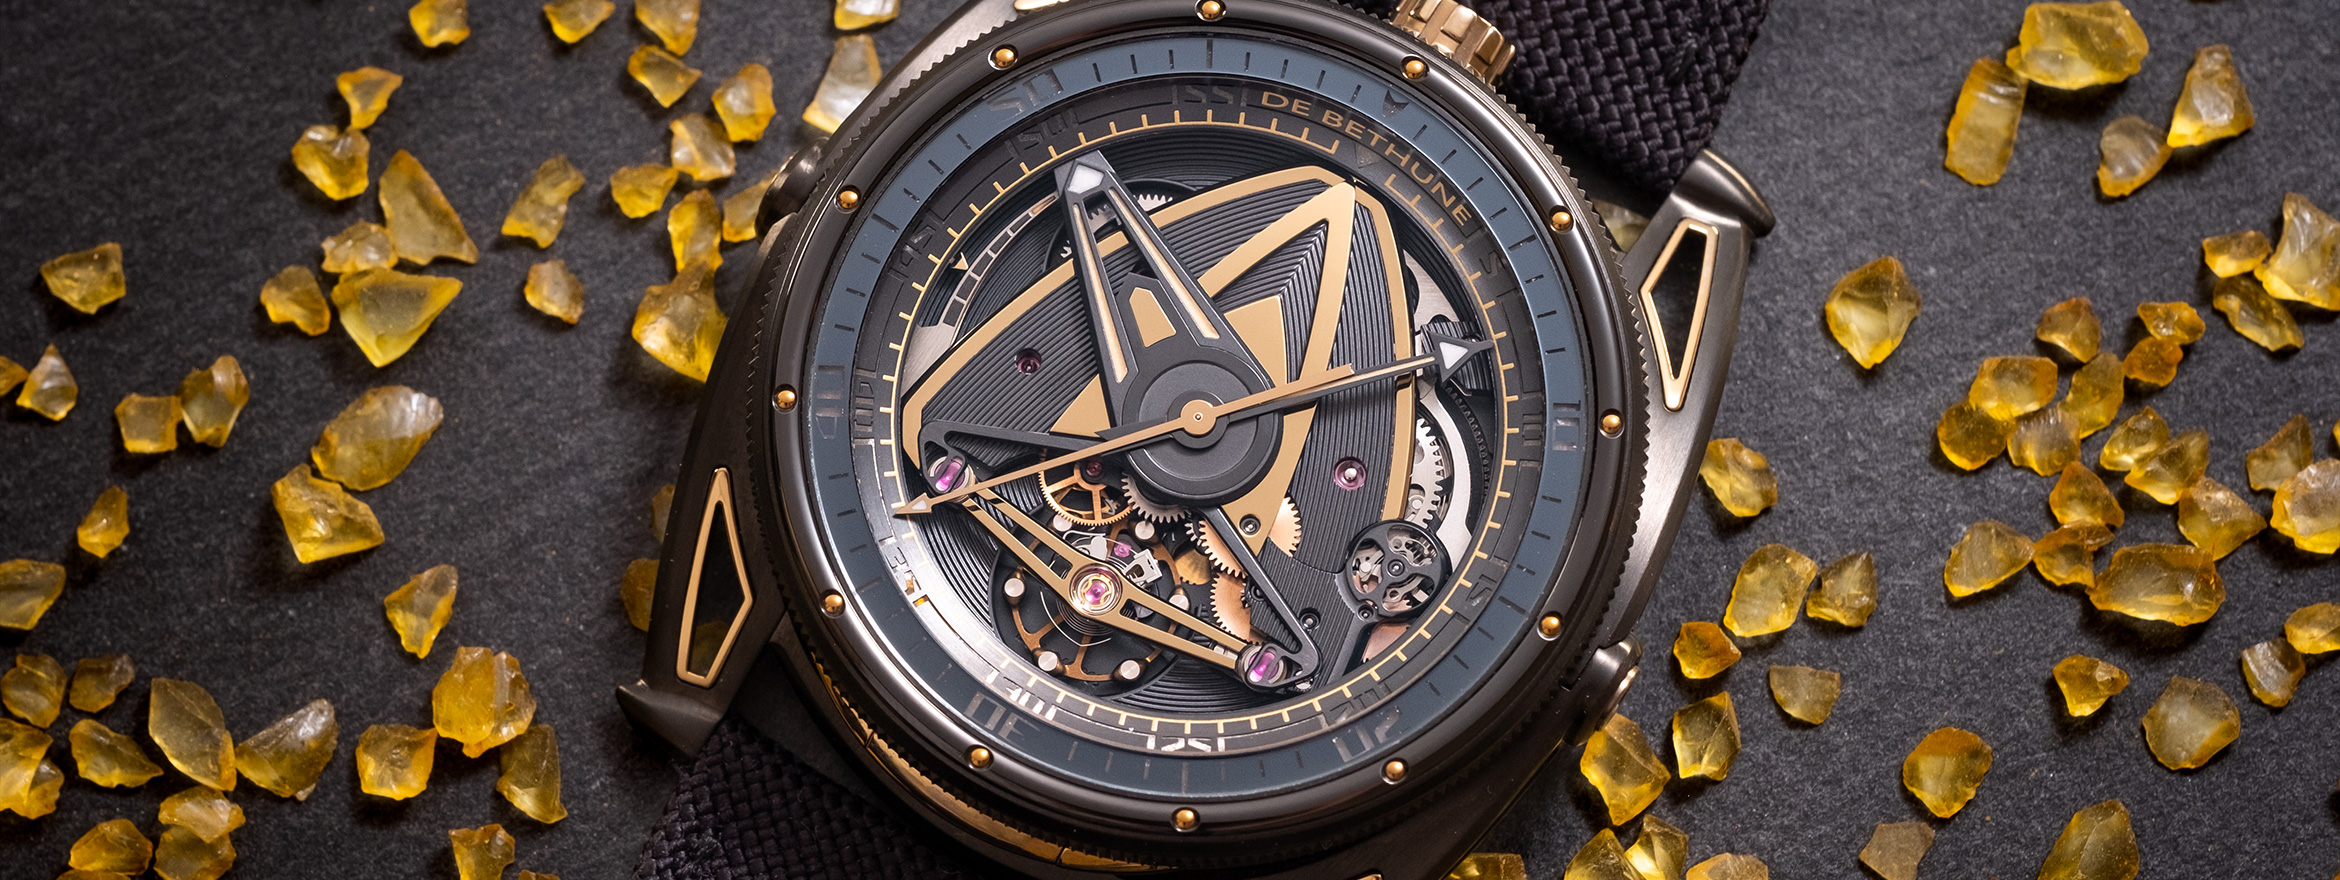 Buckle up: De Bethune DB28GS “JPS” Races in Black and Gold